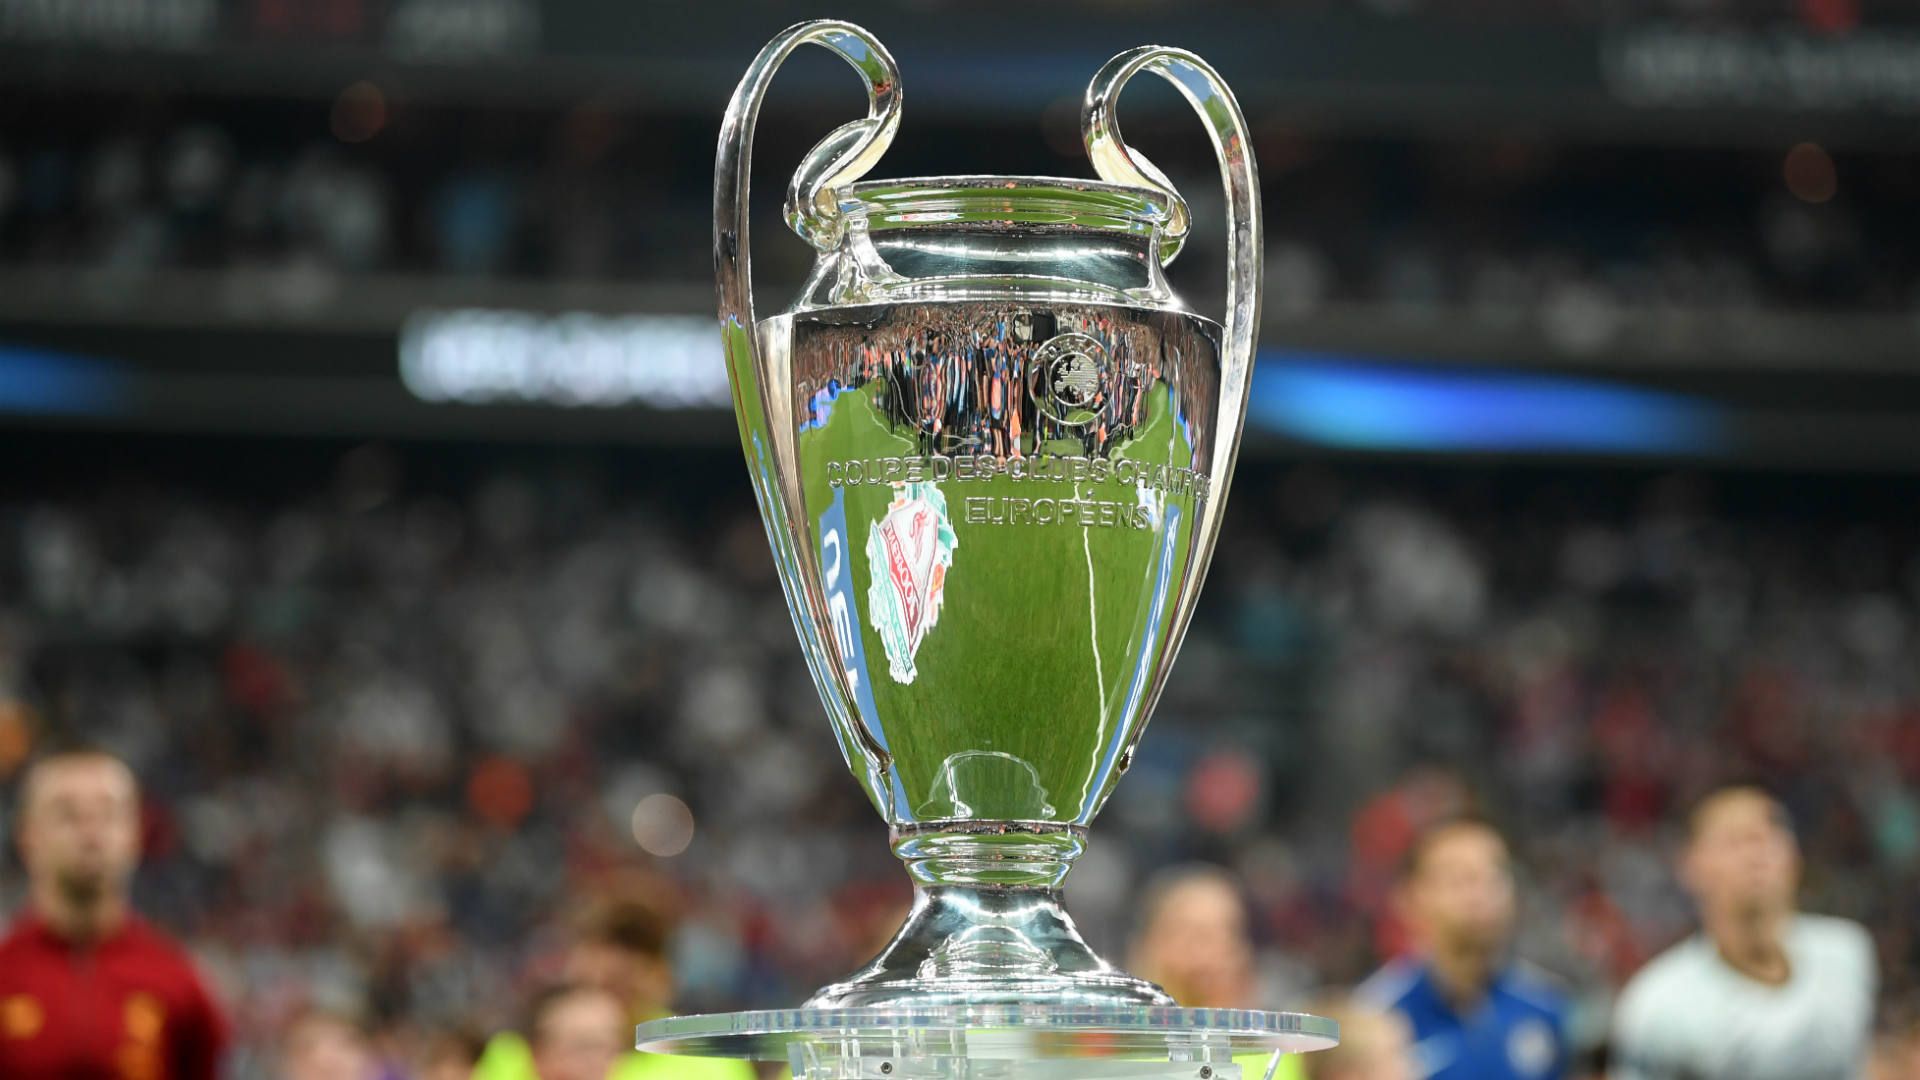 Champions League bracket 2020: Teams, standings, schedule & more to know for UEFA Round of 16 matches